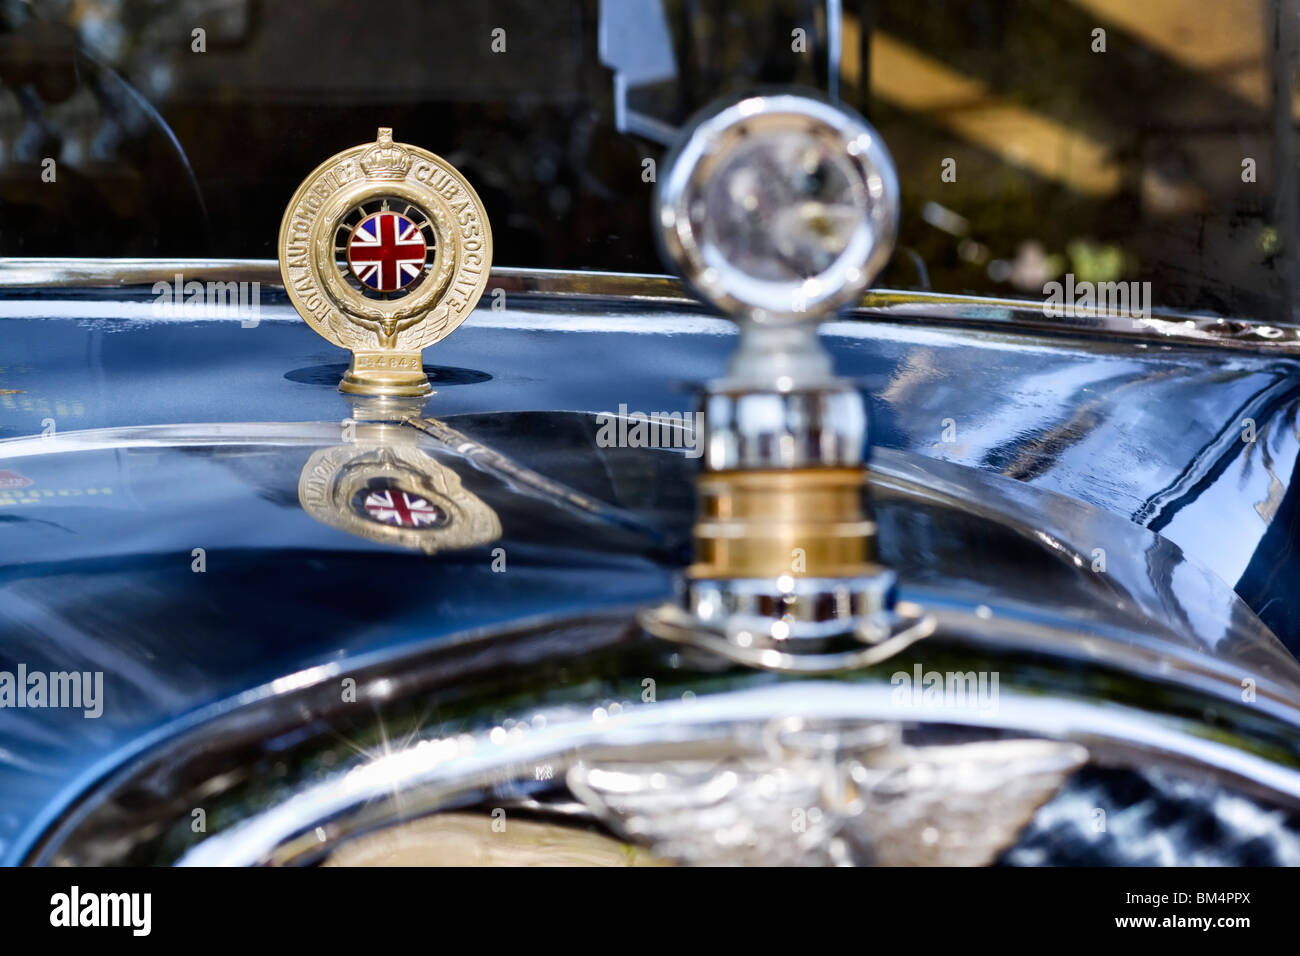 Royal Automobile Club Association badge mounted on the bonnet of a classic car. Foreground focus. Stock Photo